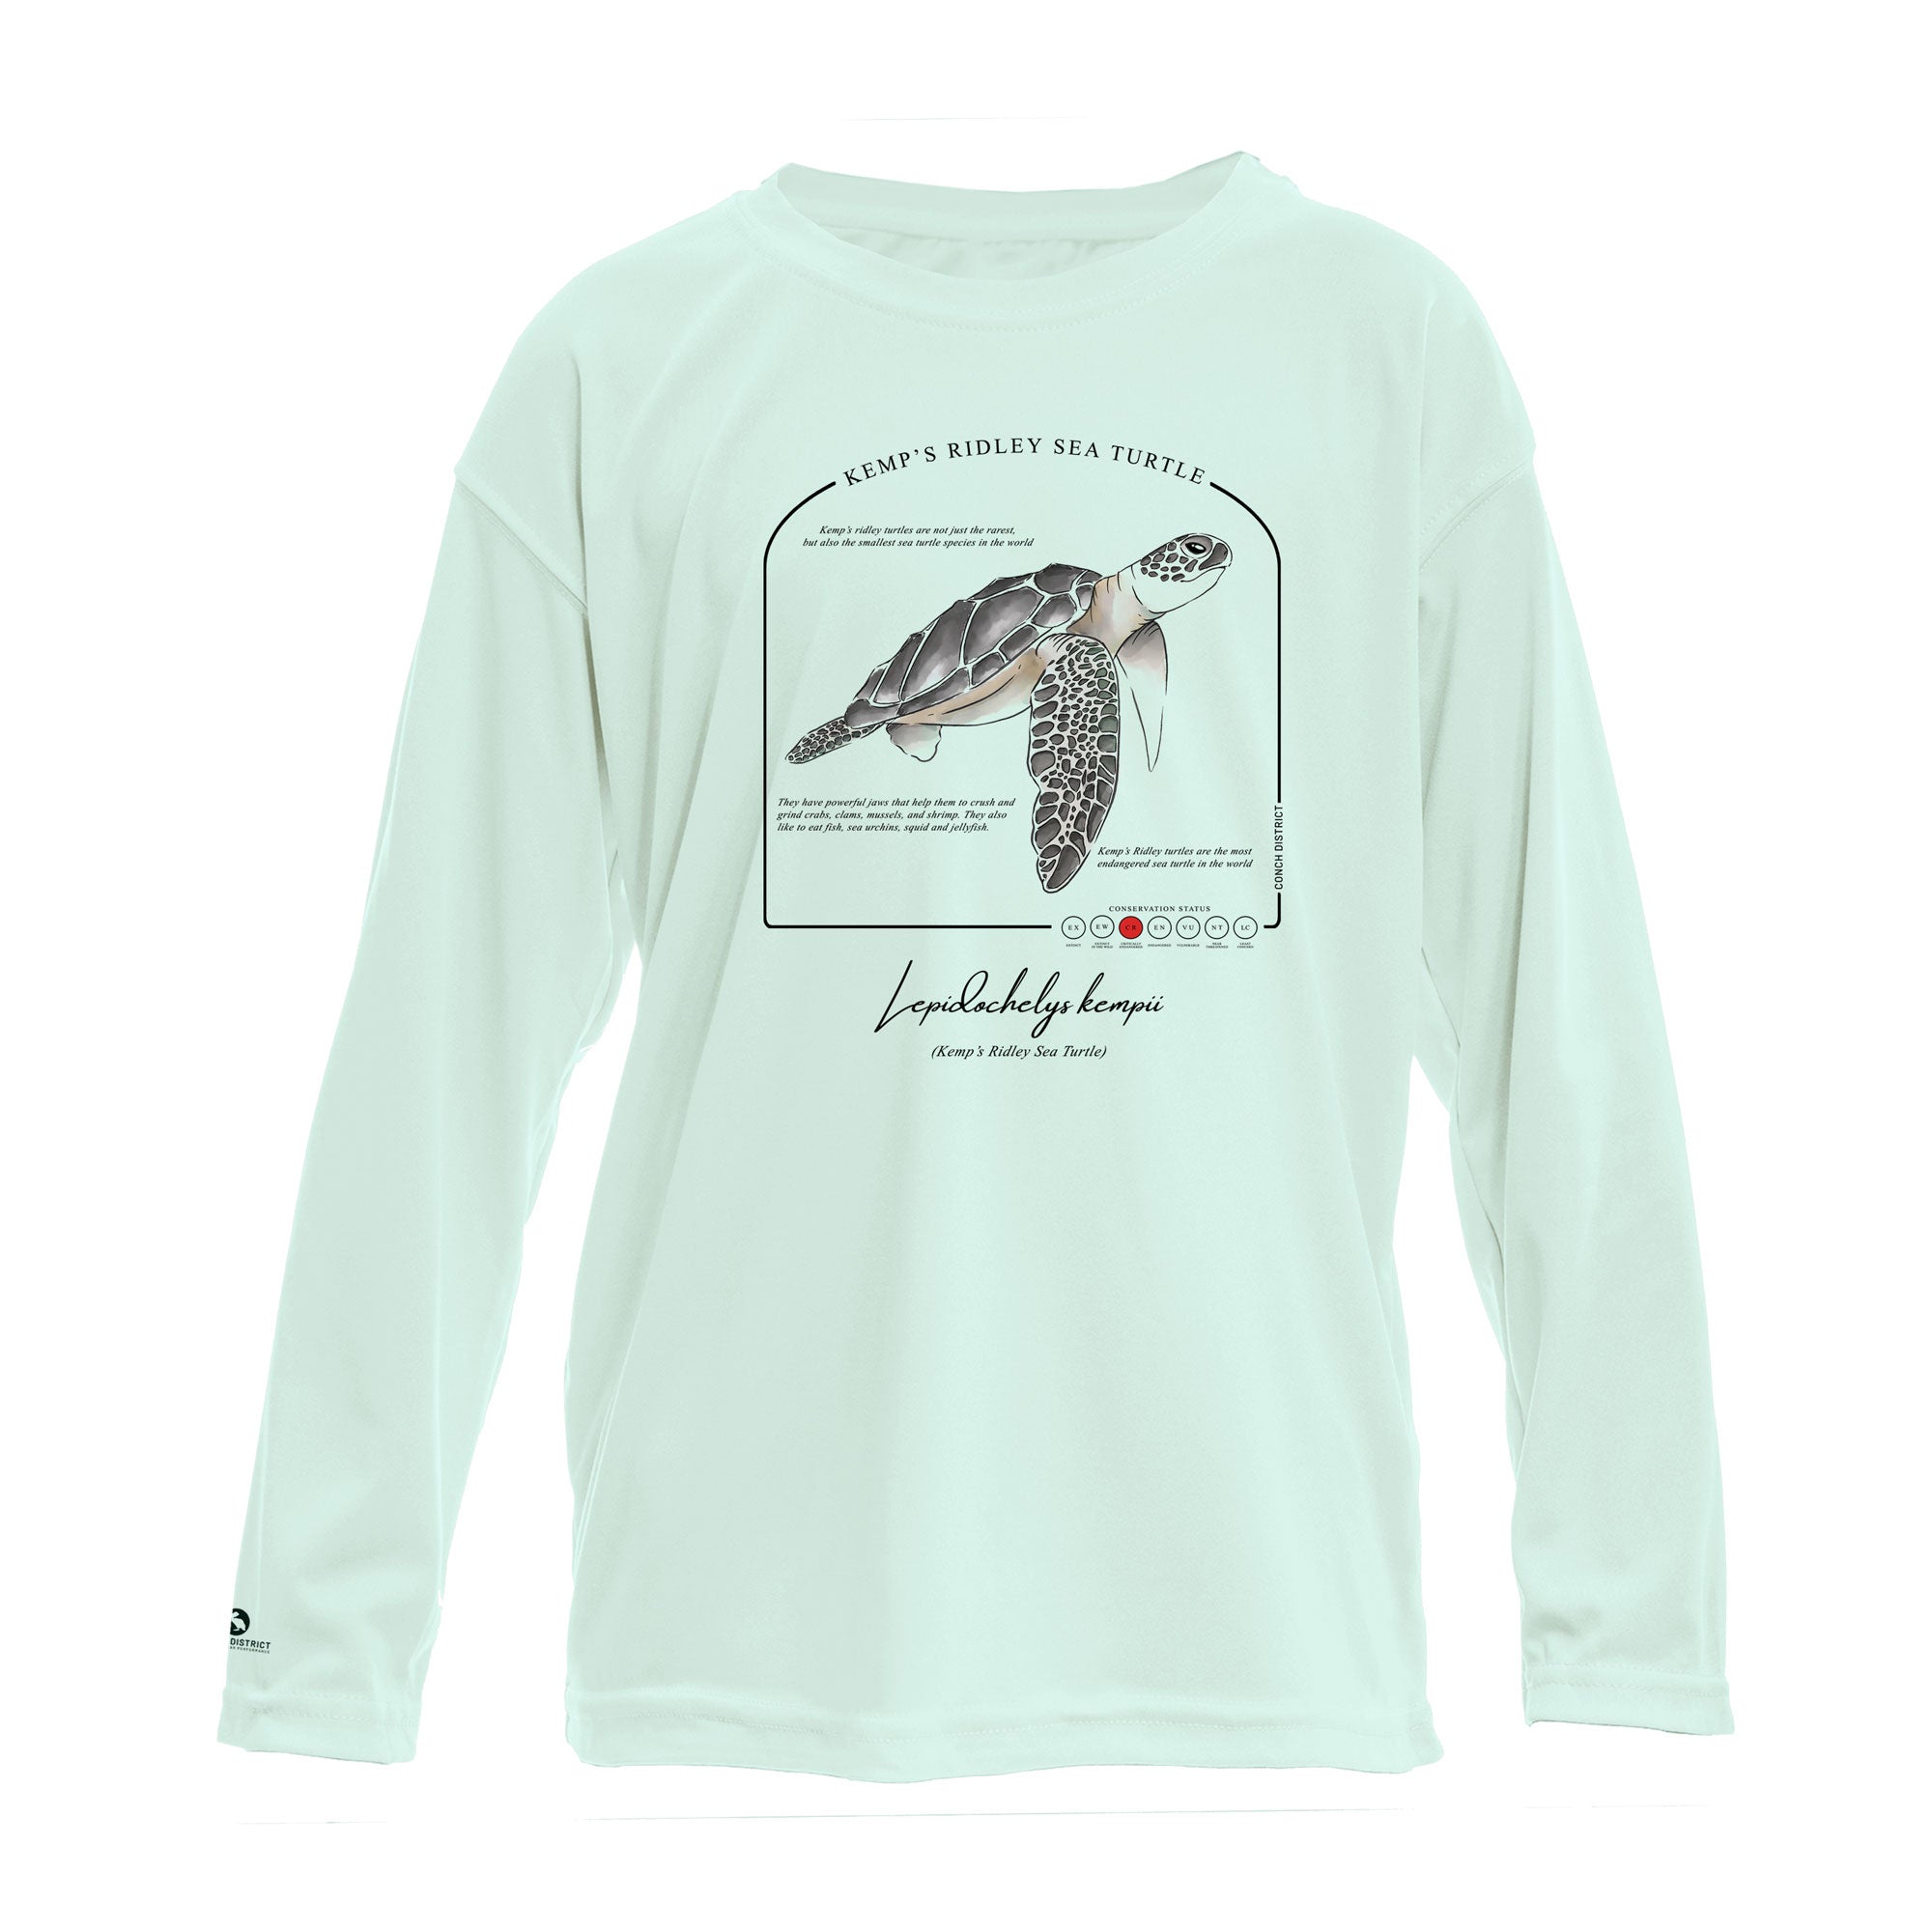 Kemps Ridley Sea Turtle Conservation Status UPF 50+ Sun Protection Shirt Toddler & Youth